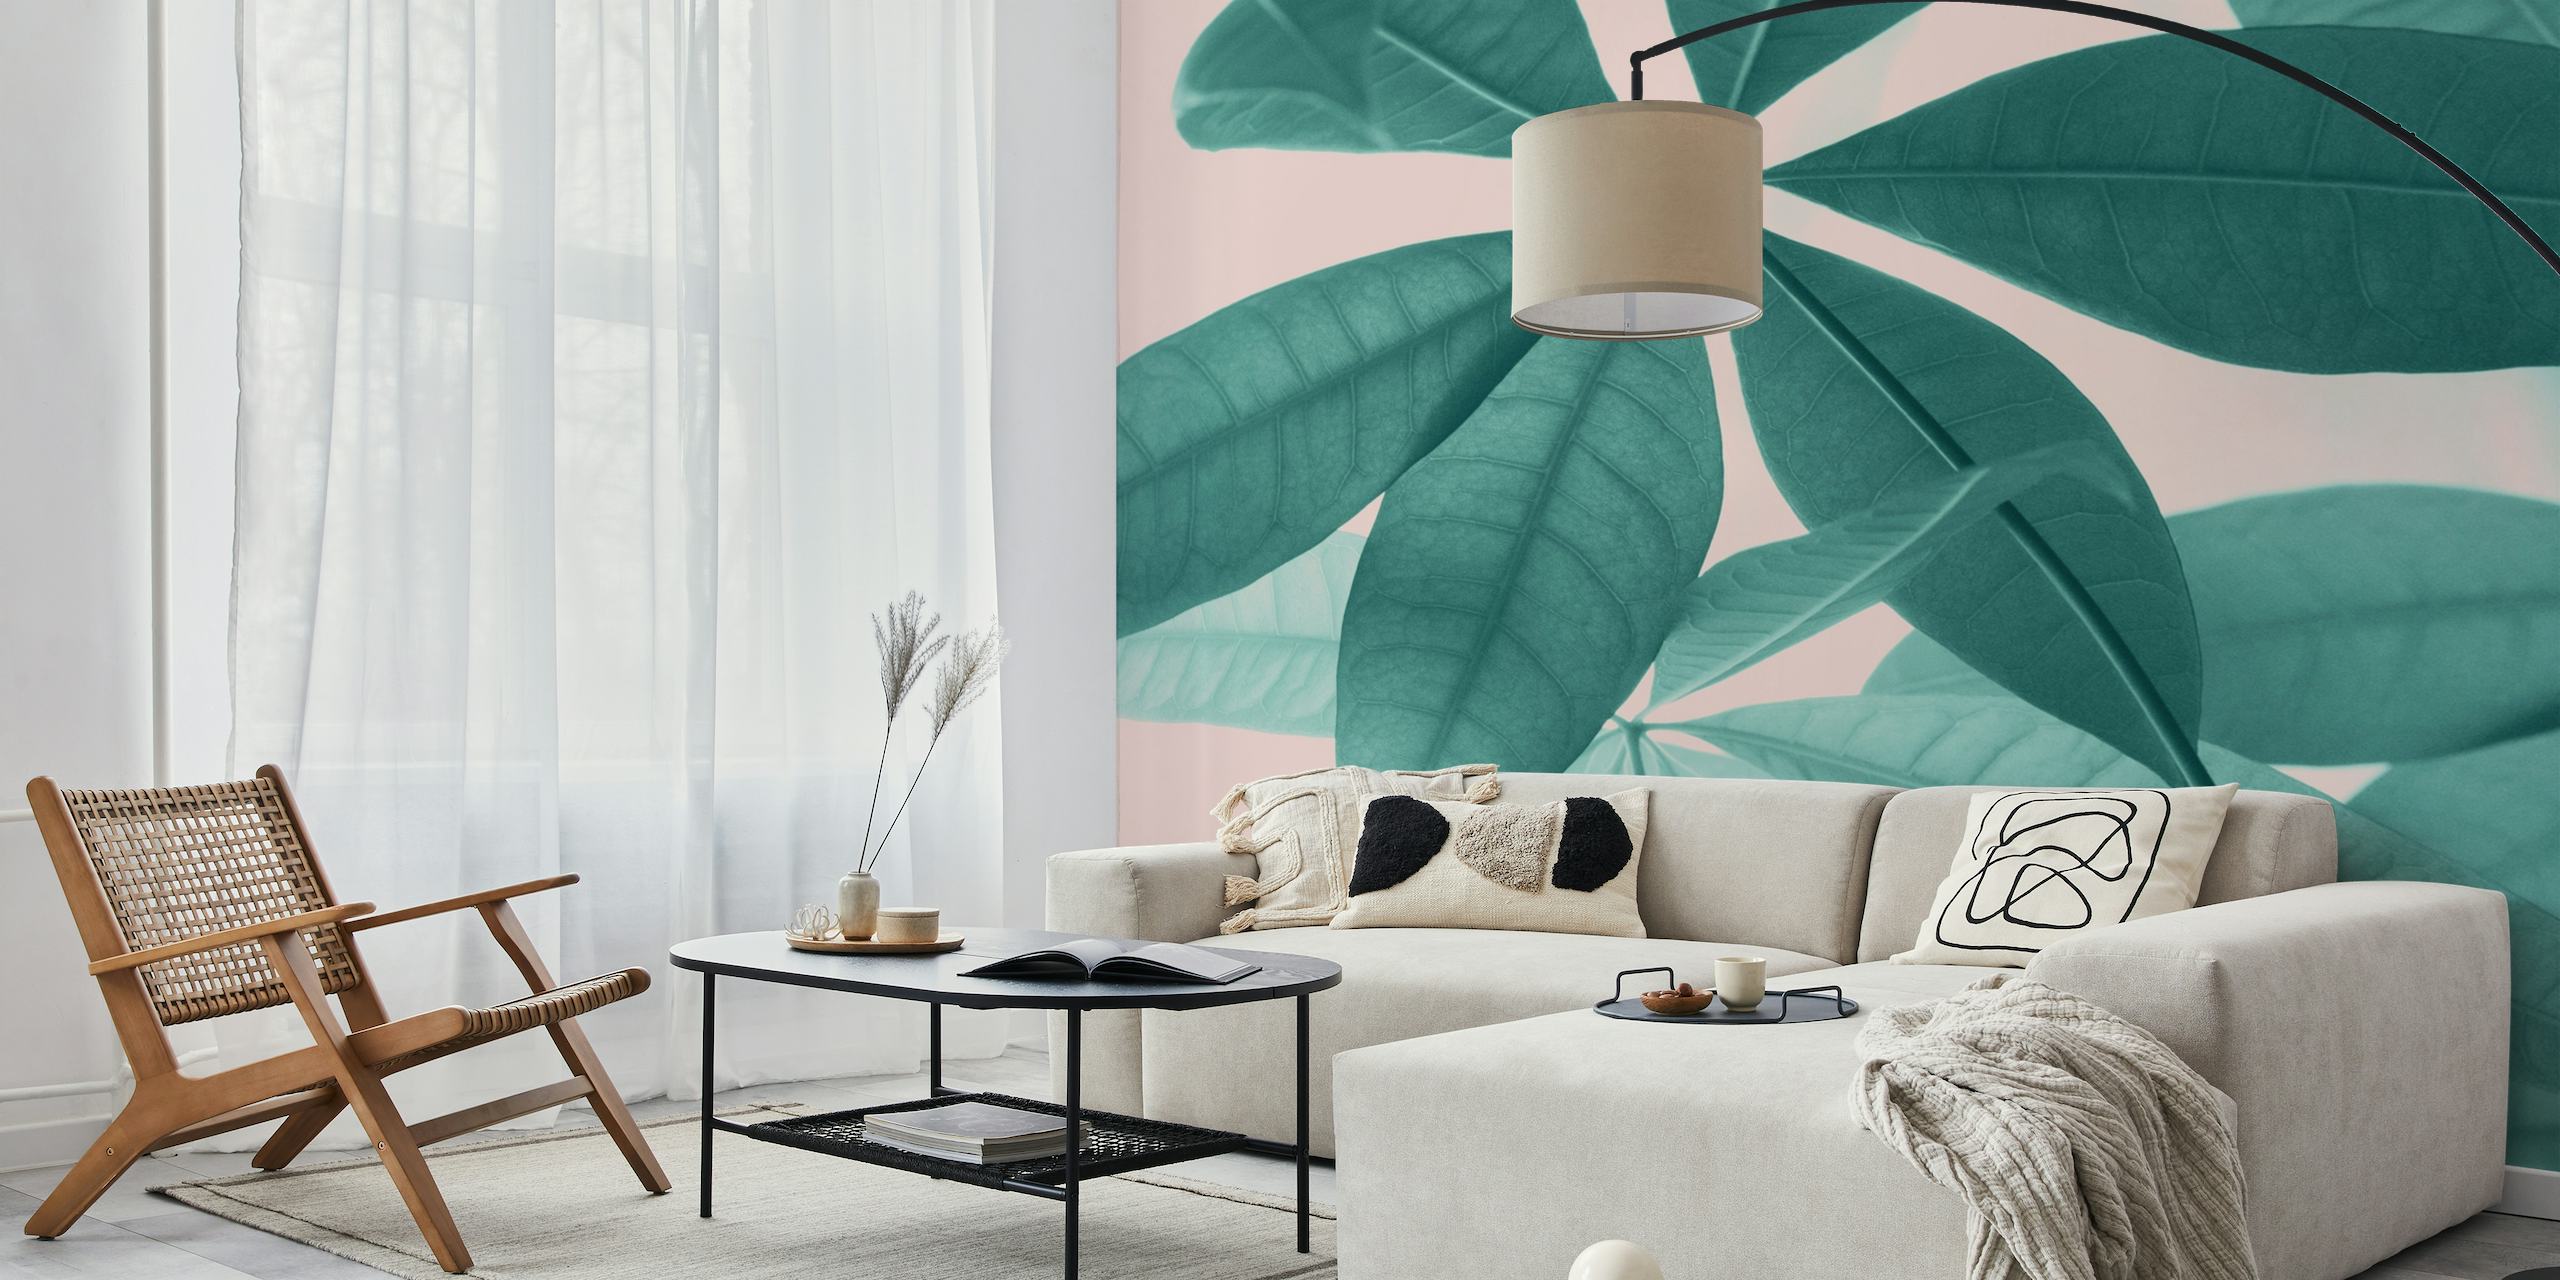 Pachira Aquatica leaves wall mural in pink and teal